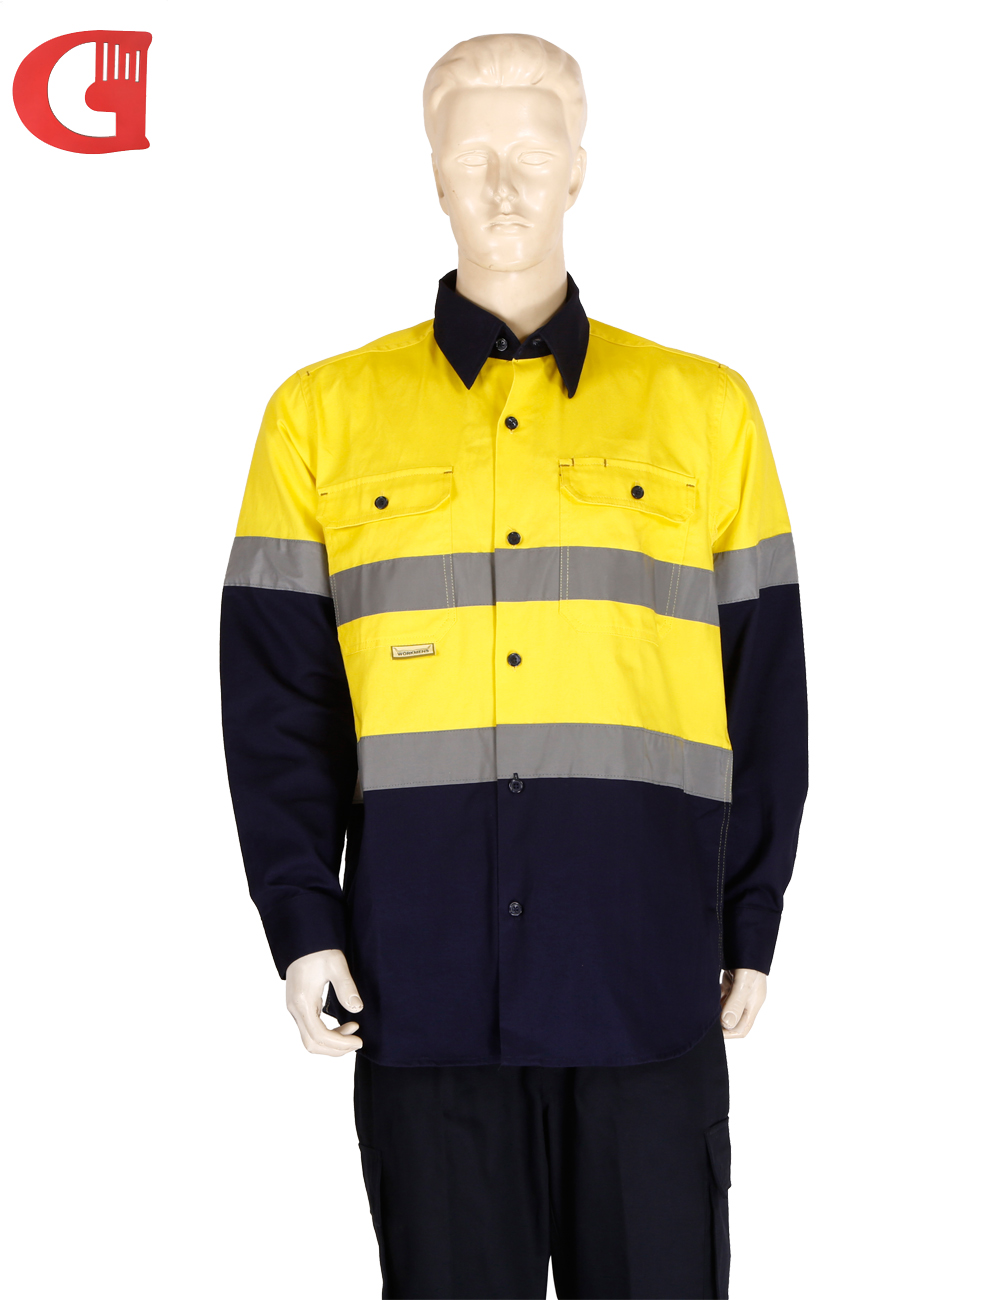 Workwear Supplier 100% Cotton Work Shirt with Reflective tape